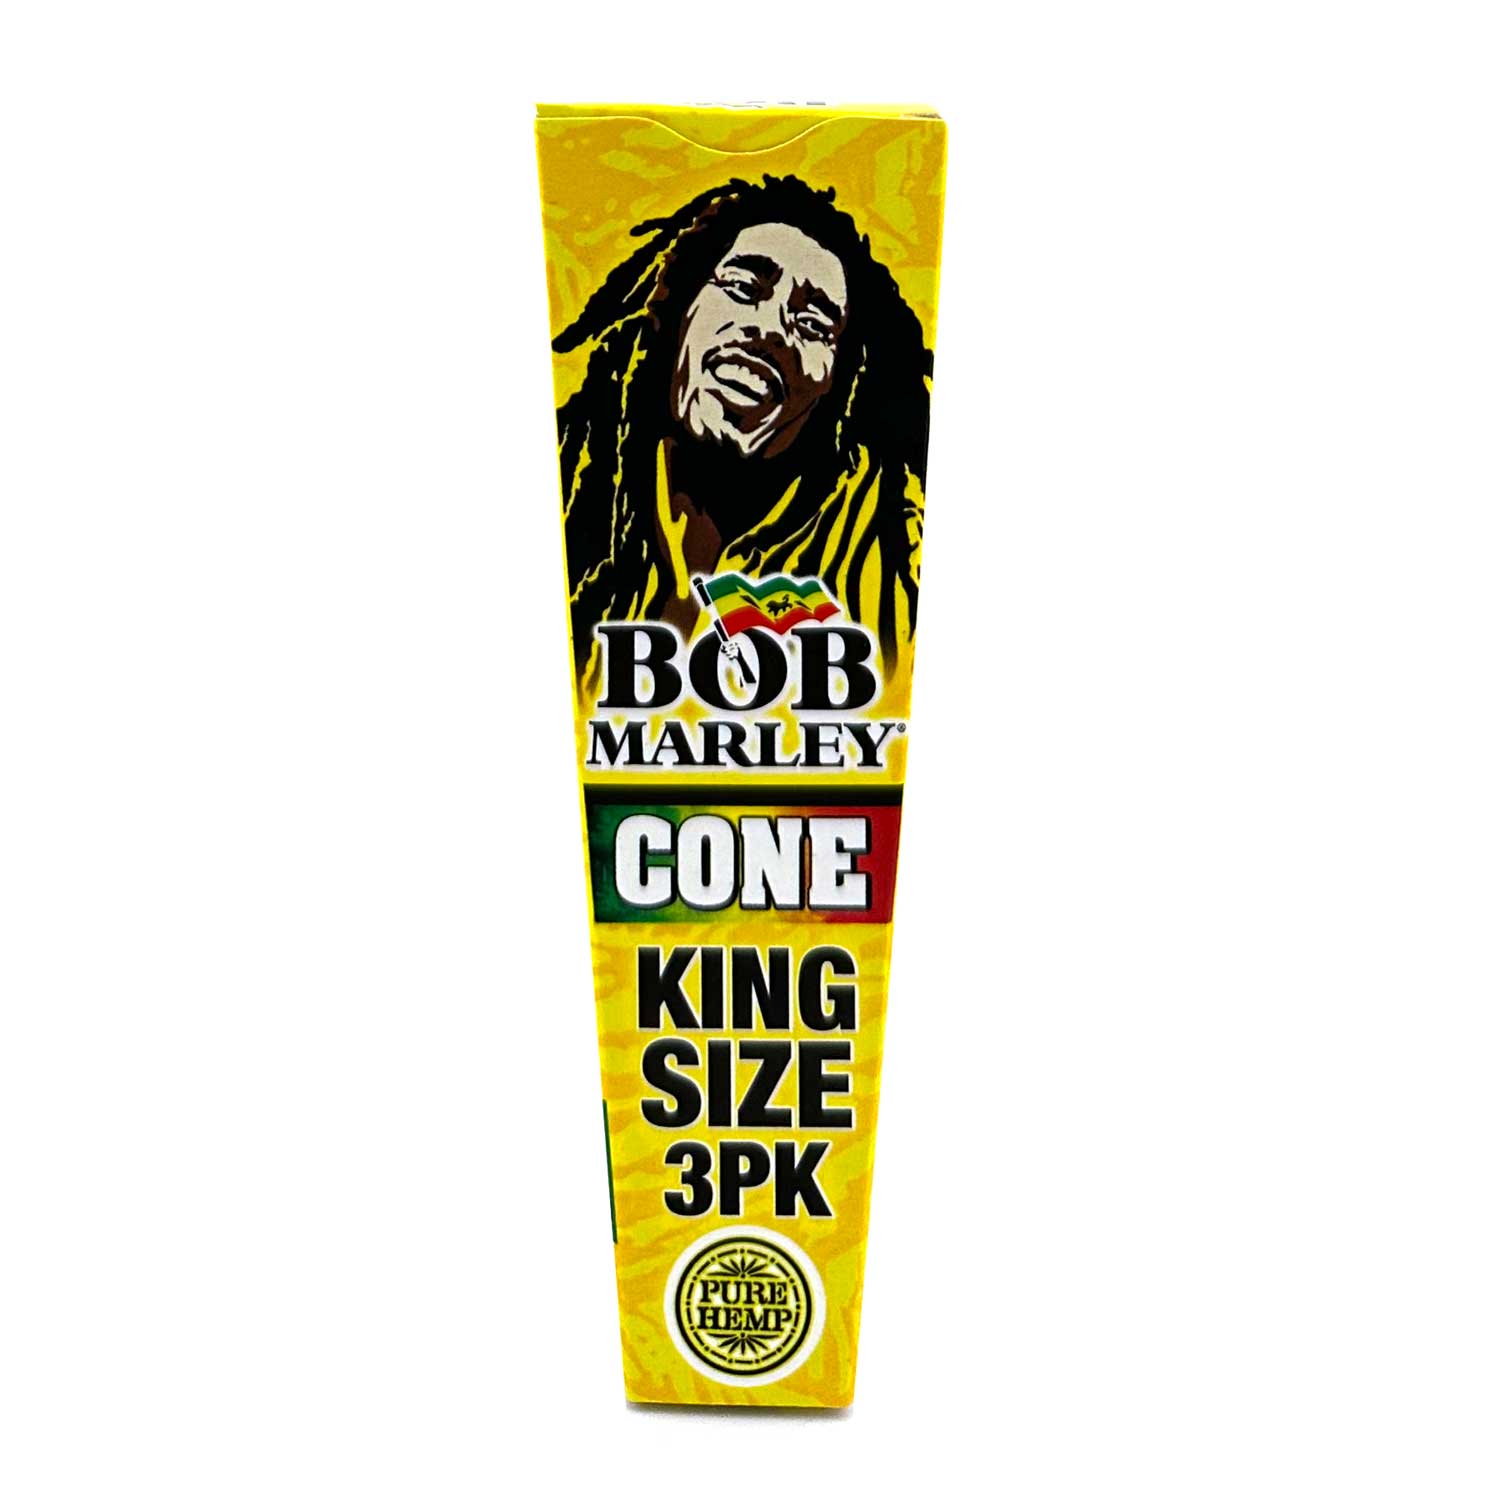 Bob Marley Pre Rolled Cones King Size